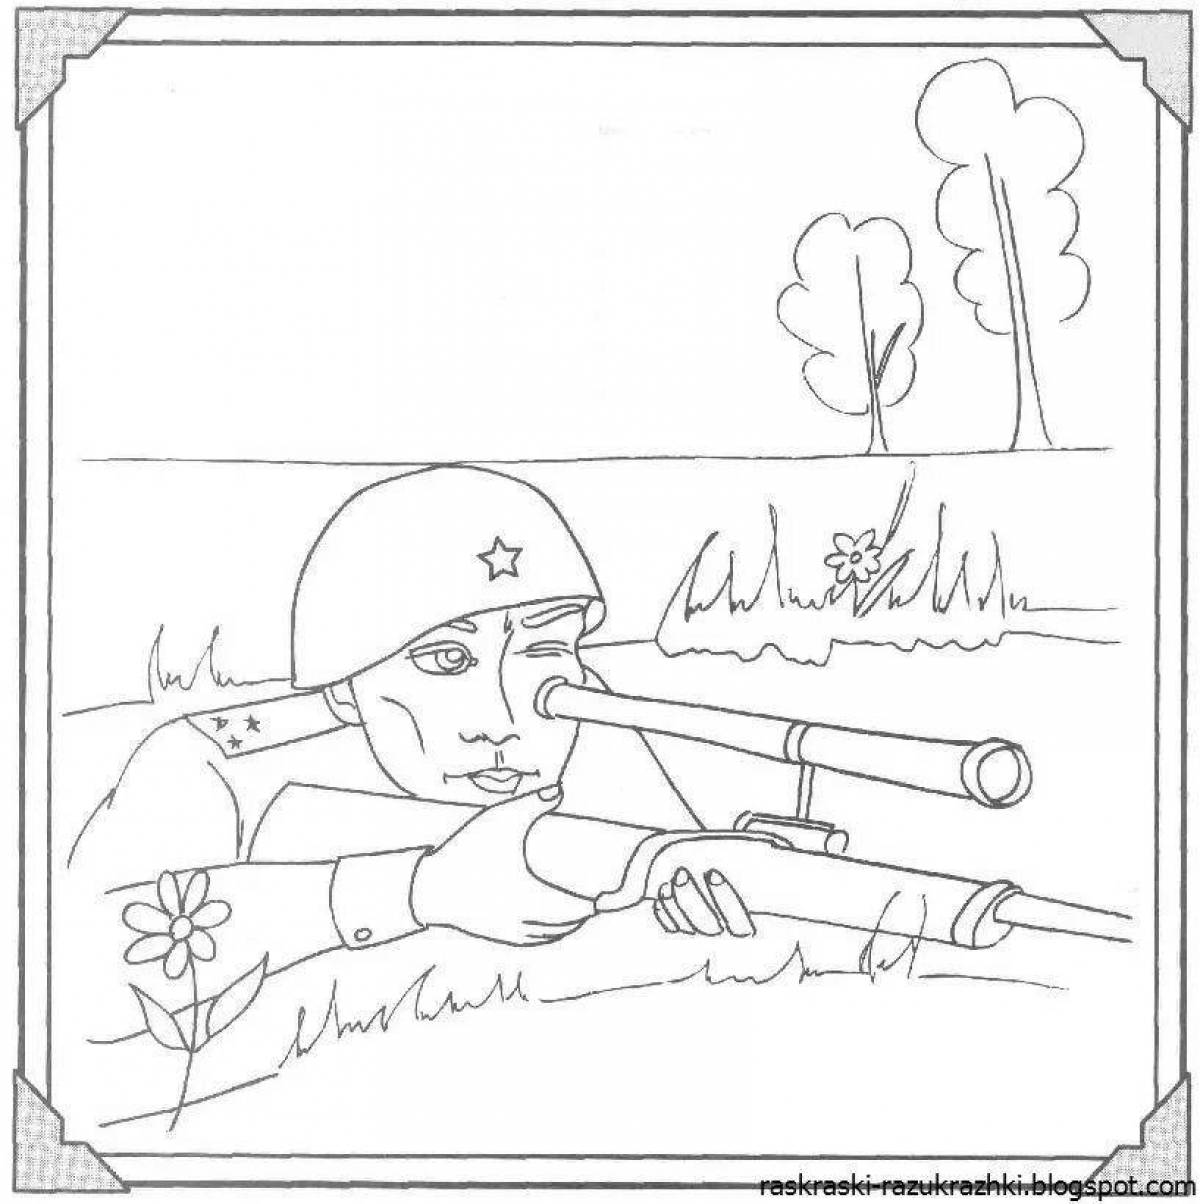 On a military theme for children to school #17